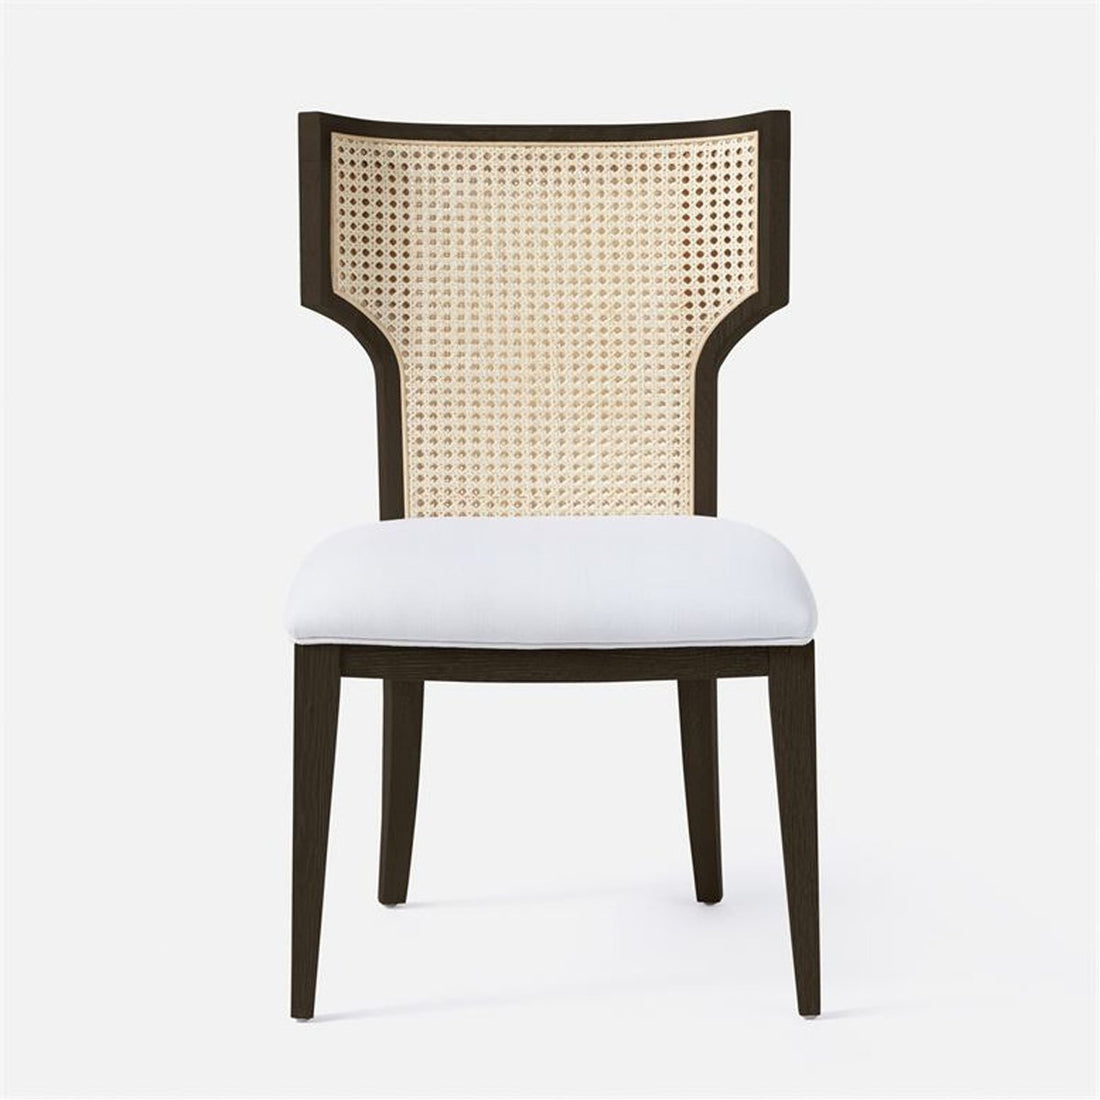 Made Goods Carleen Wingback Cane Dining Chair in Garonne Leather